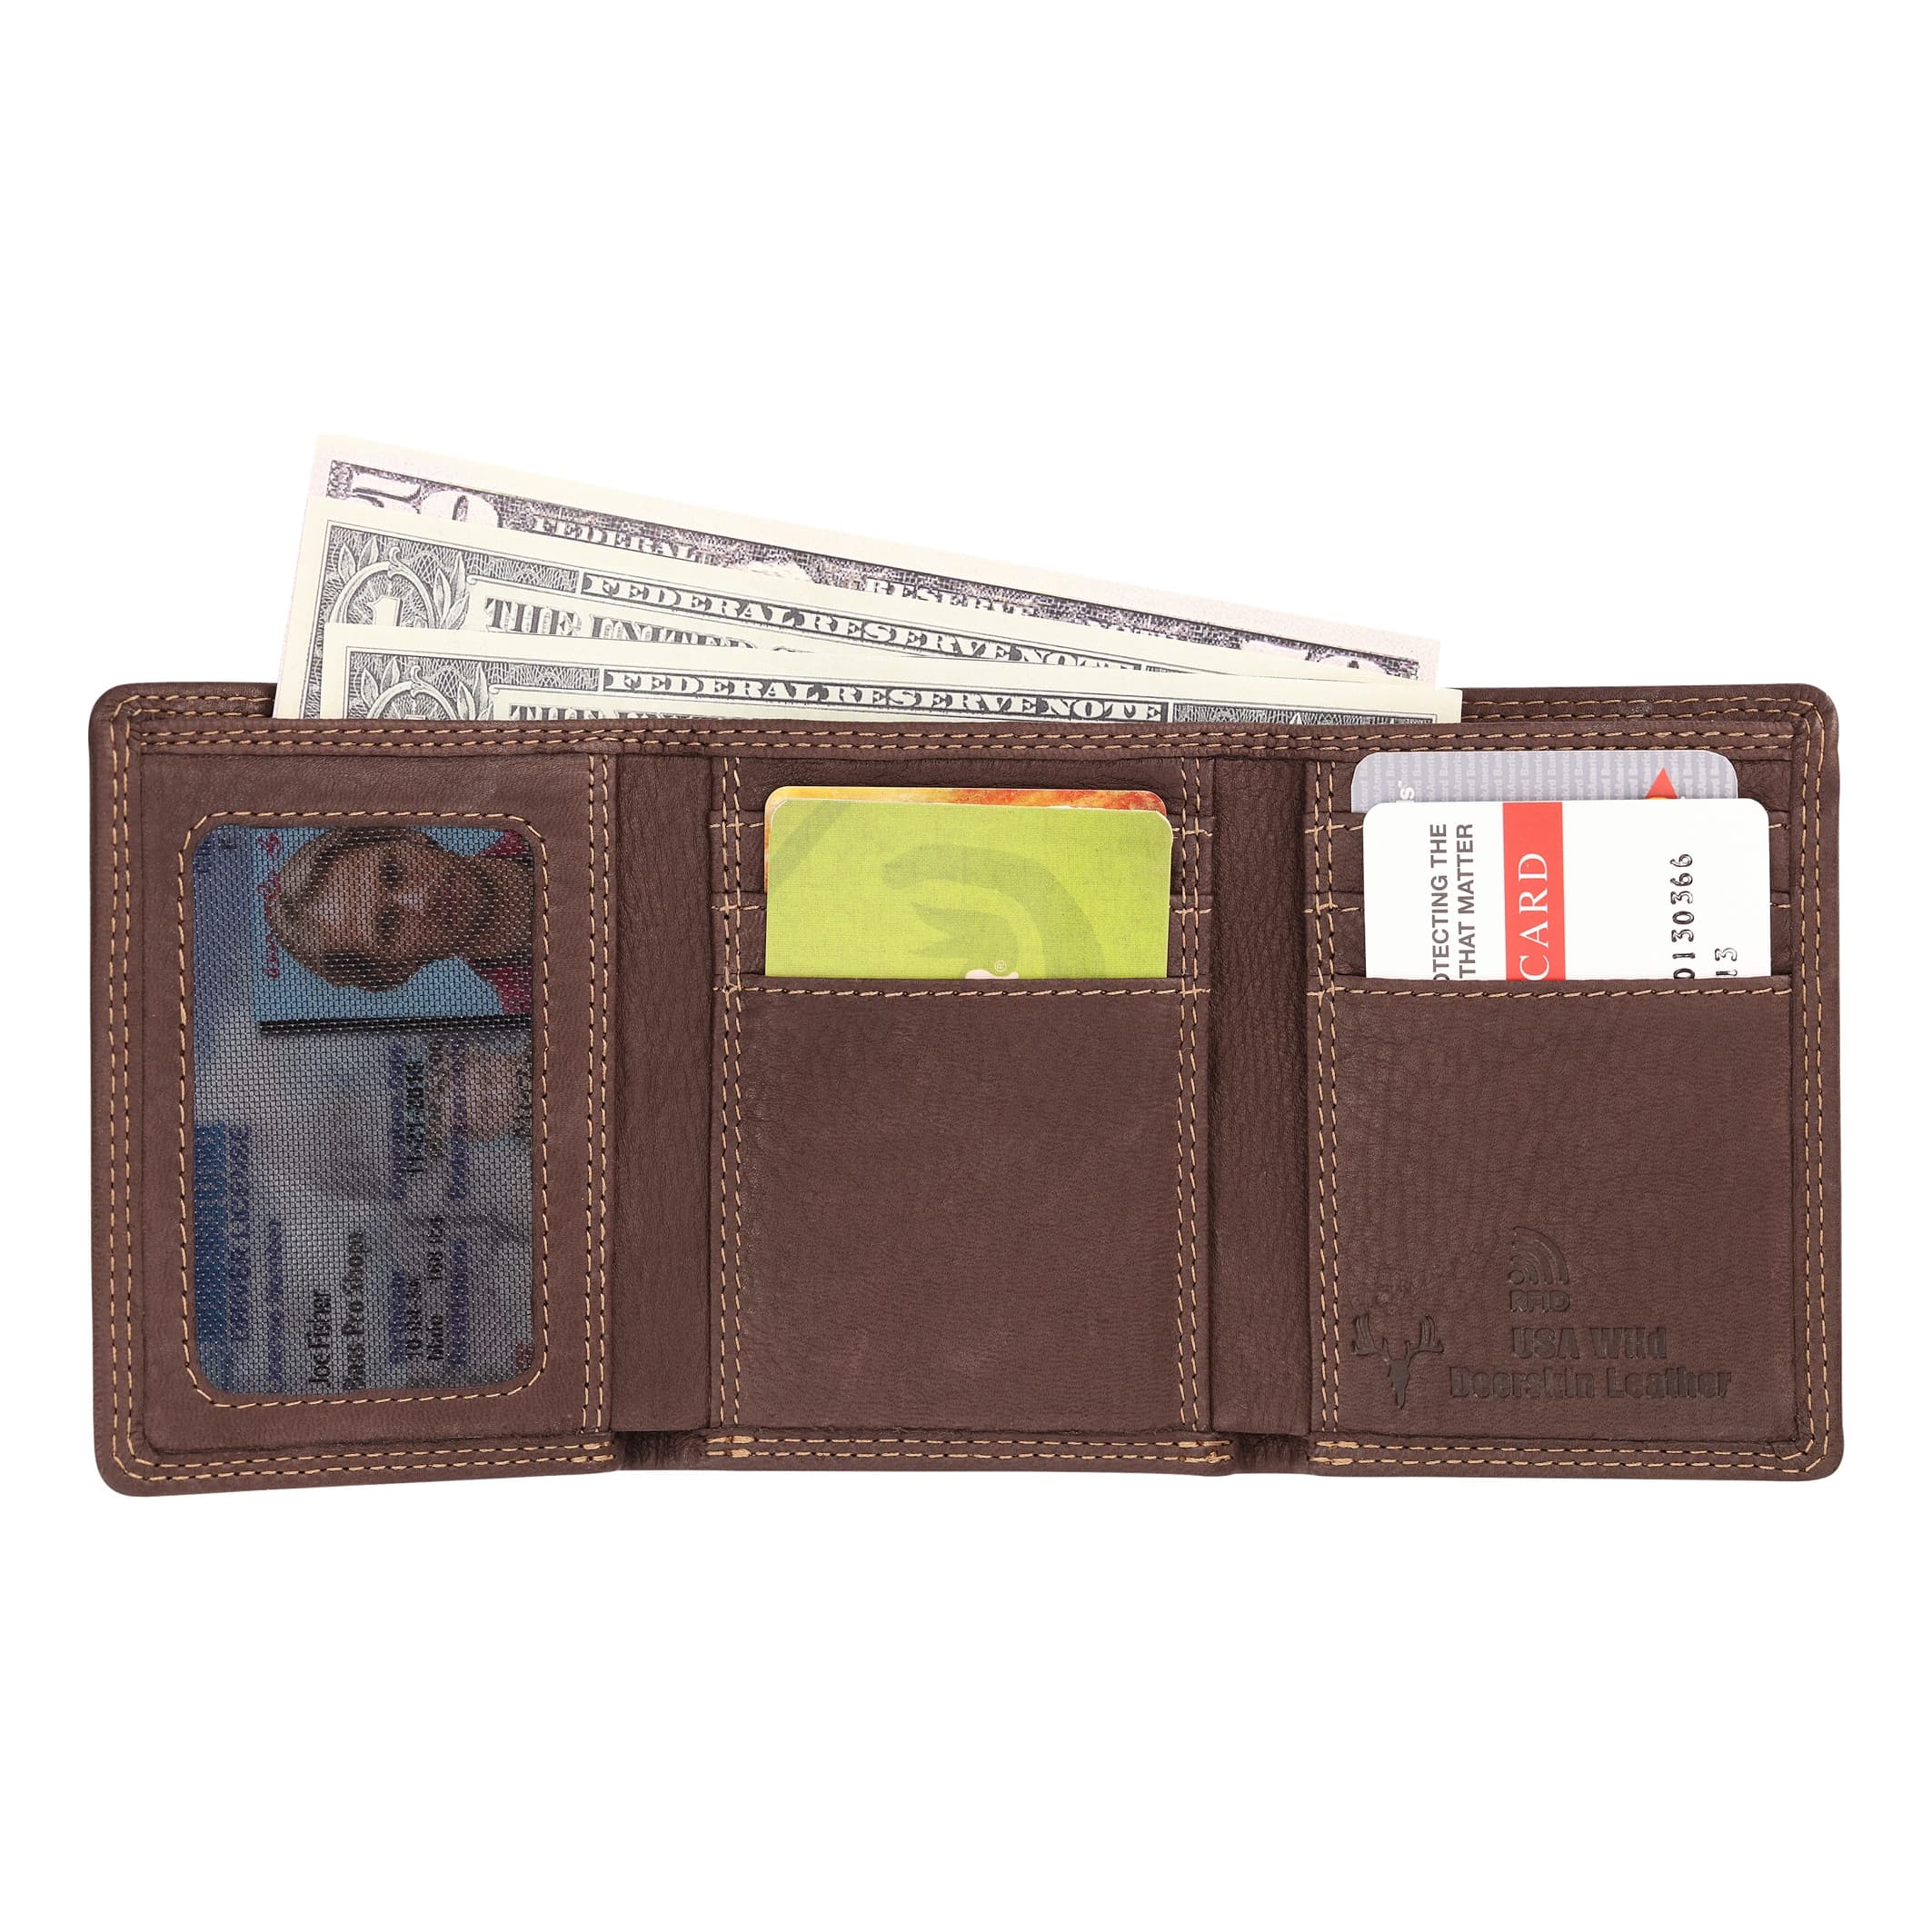 RedHead® Wild Deerskin Leather Trifold RFID Wallet - inside (contents not included)